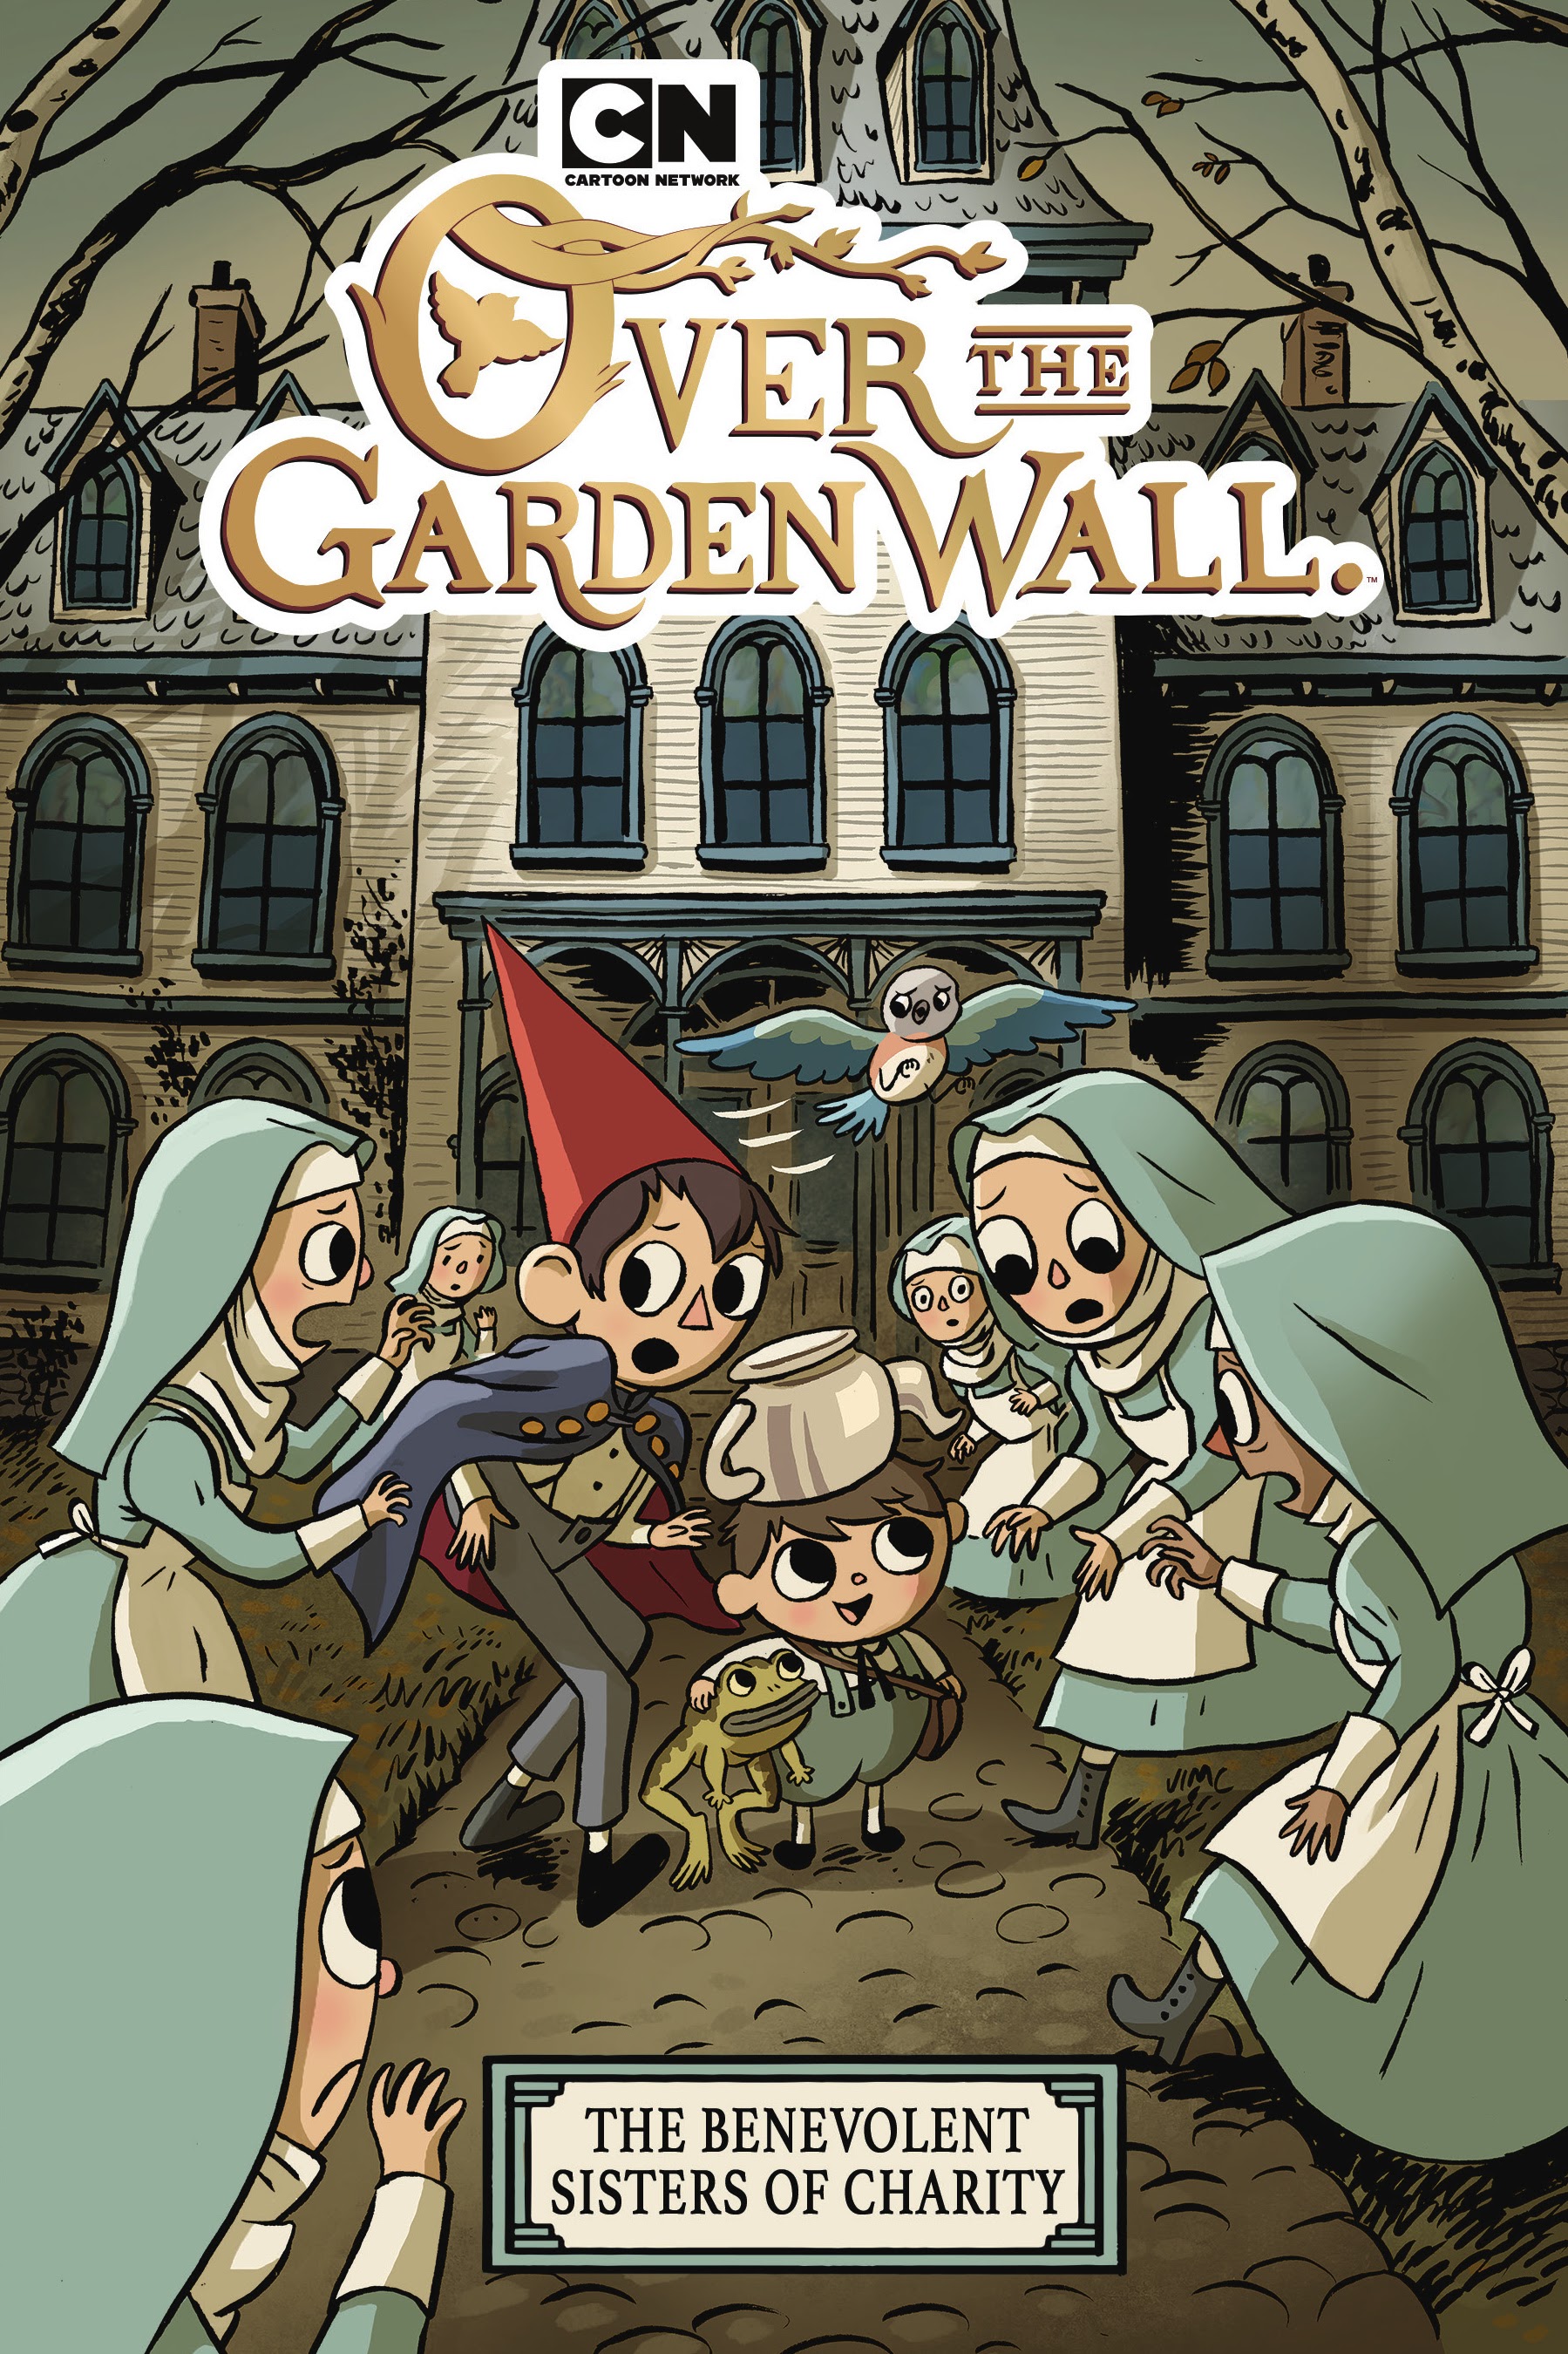 Read online Over the Garden Wall: Benevolent Sisters of Charity comic -  Issue # TPB - 1